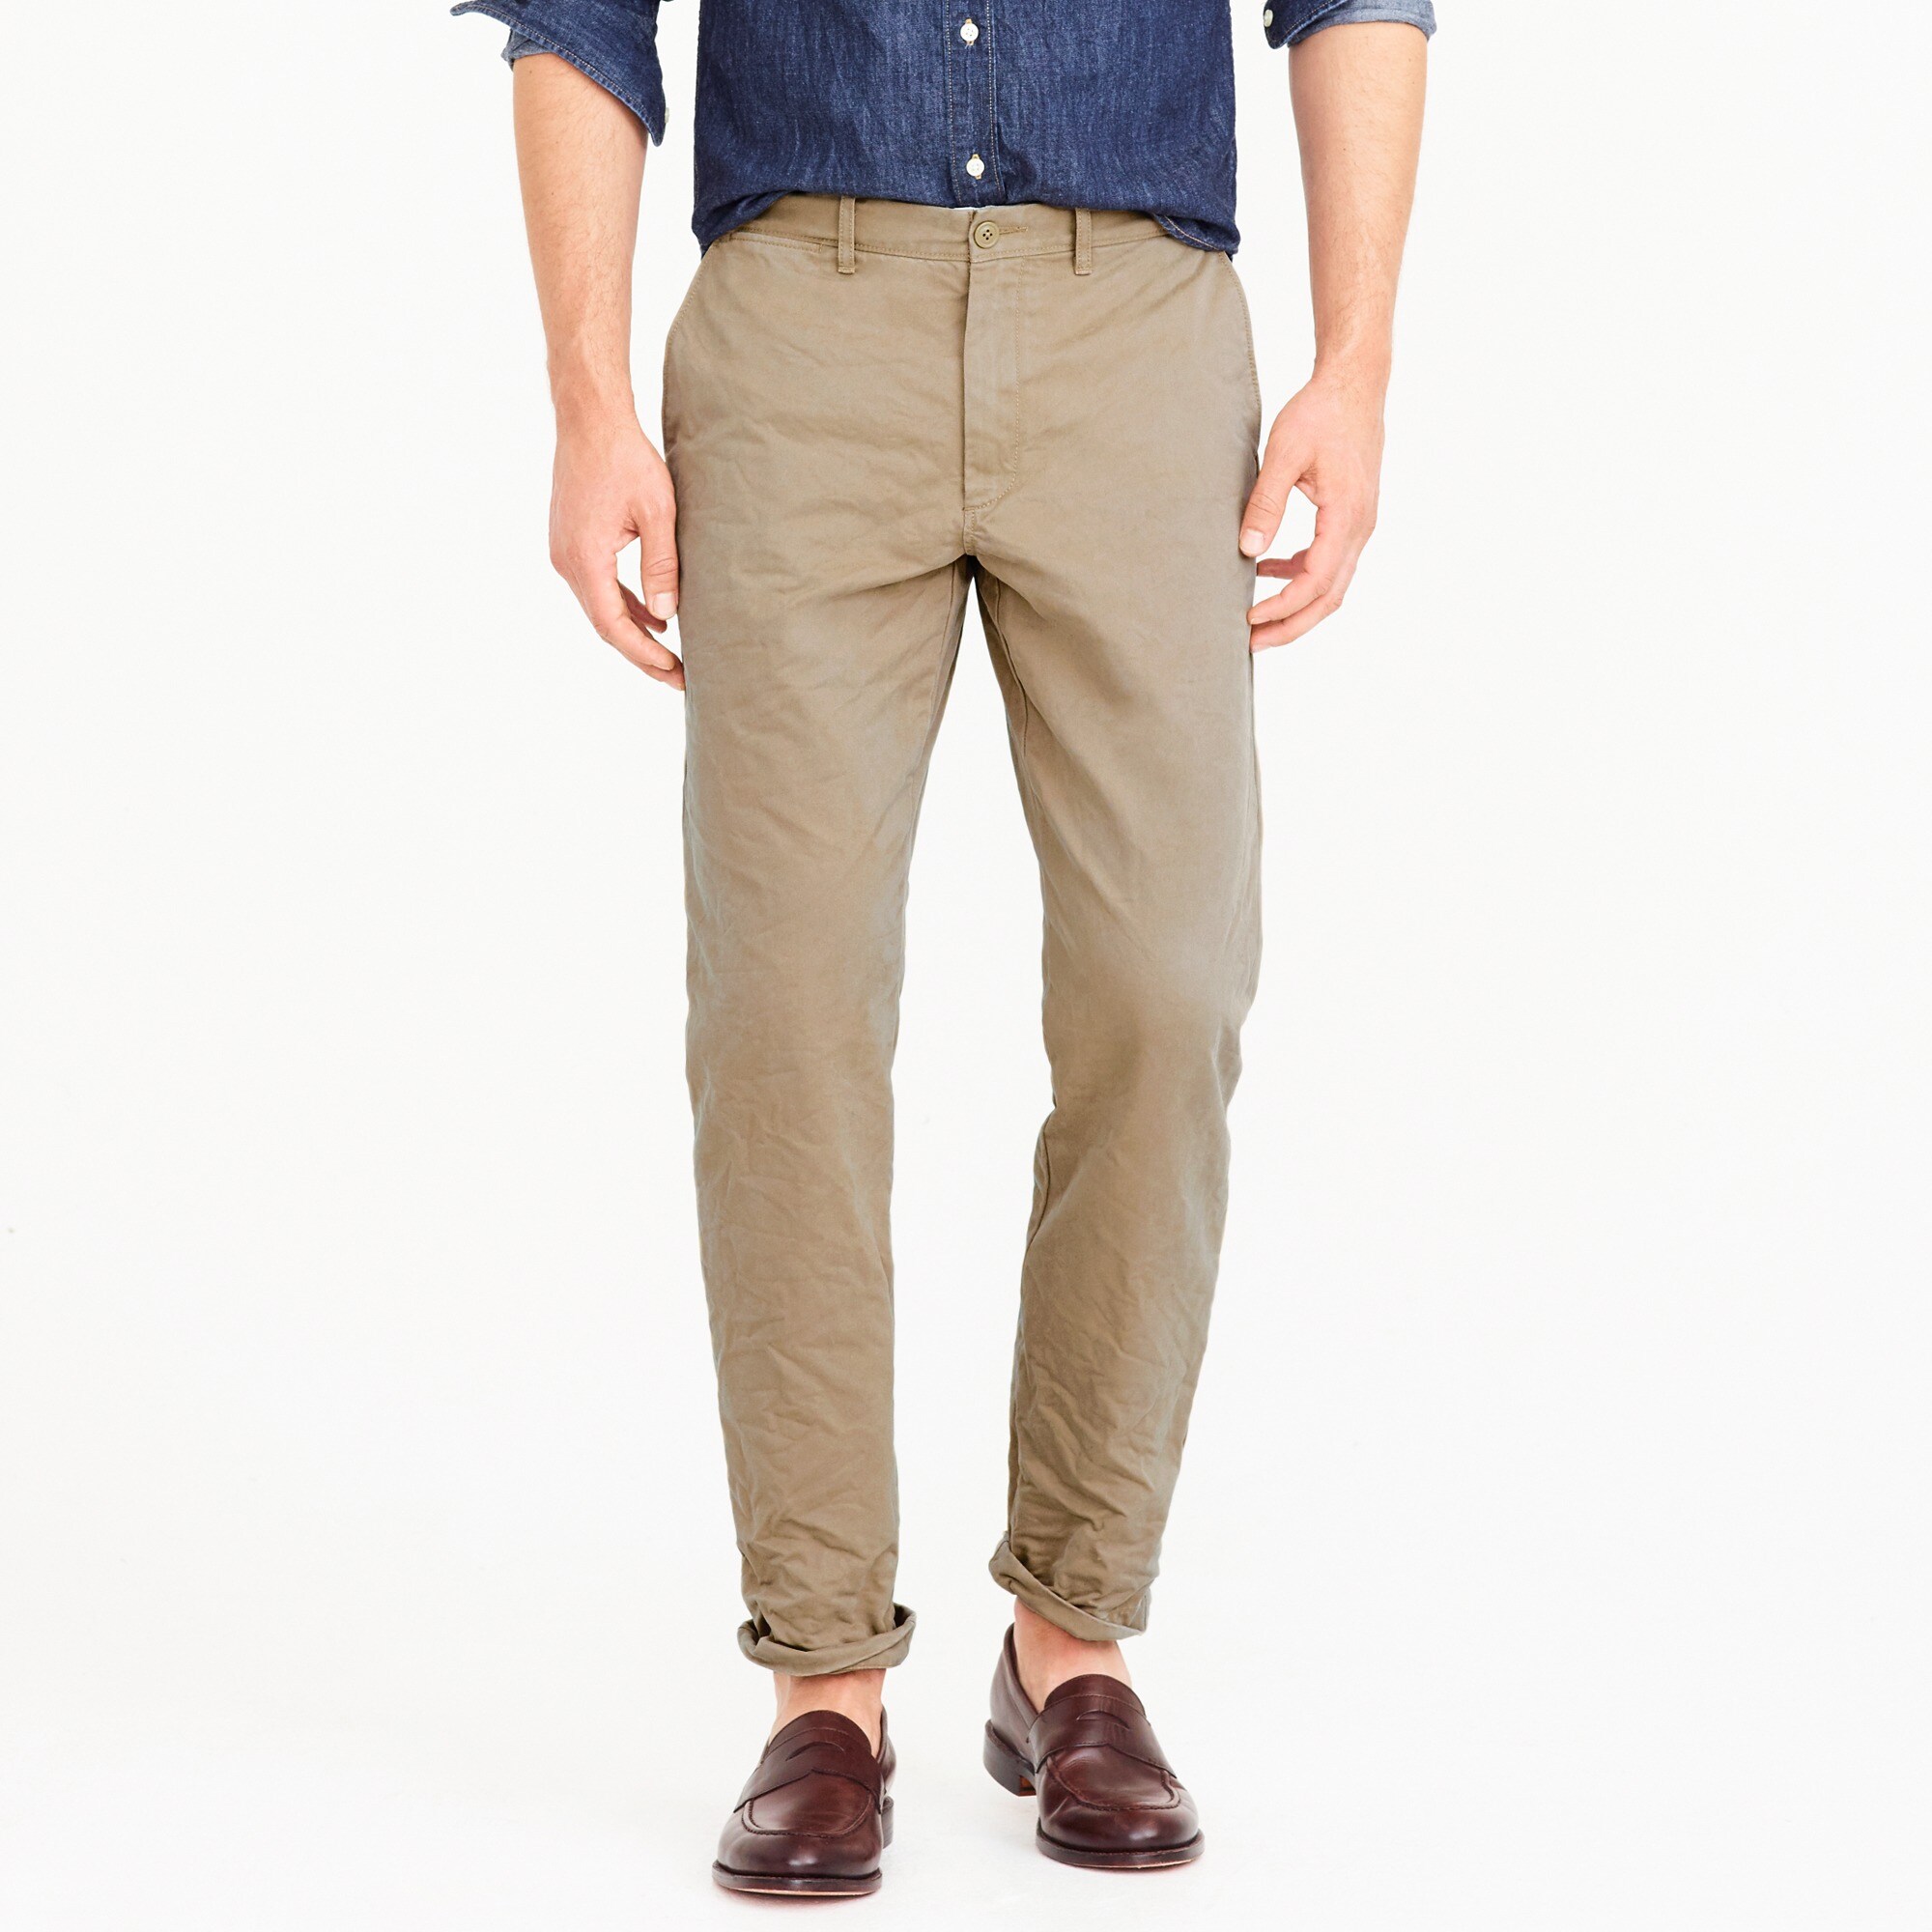 1040 Athletic-fit Broken-in Chino Pant 